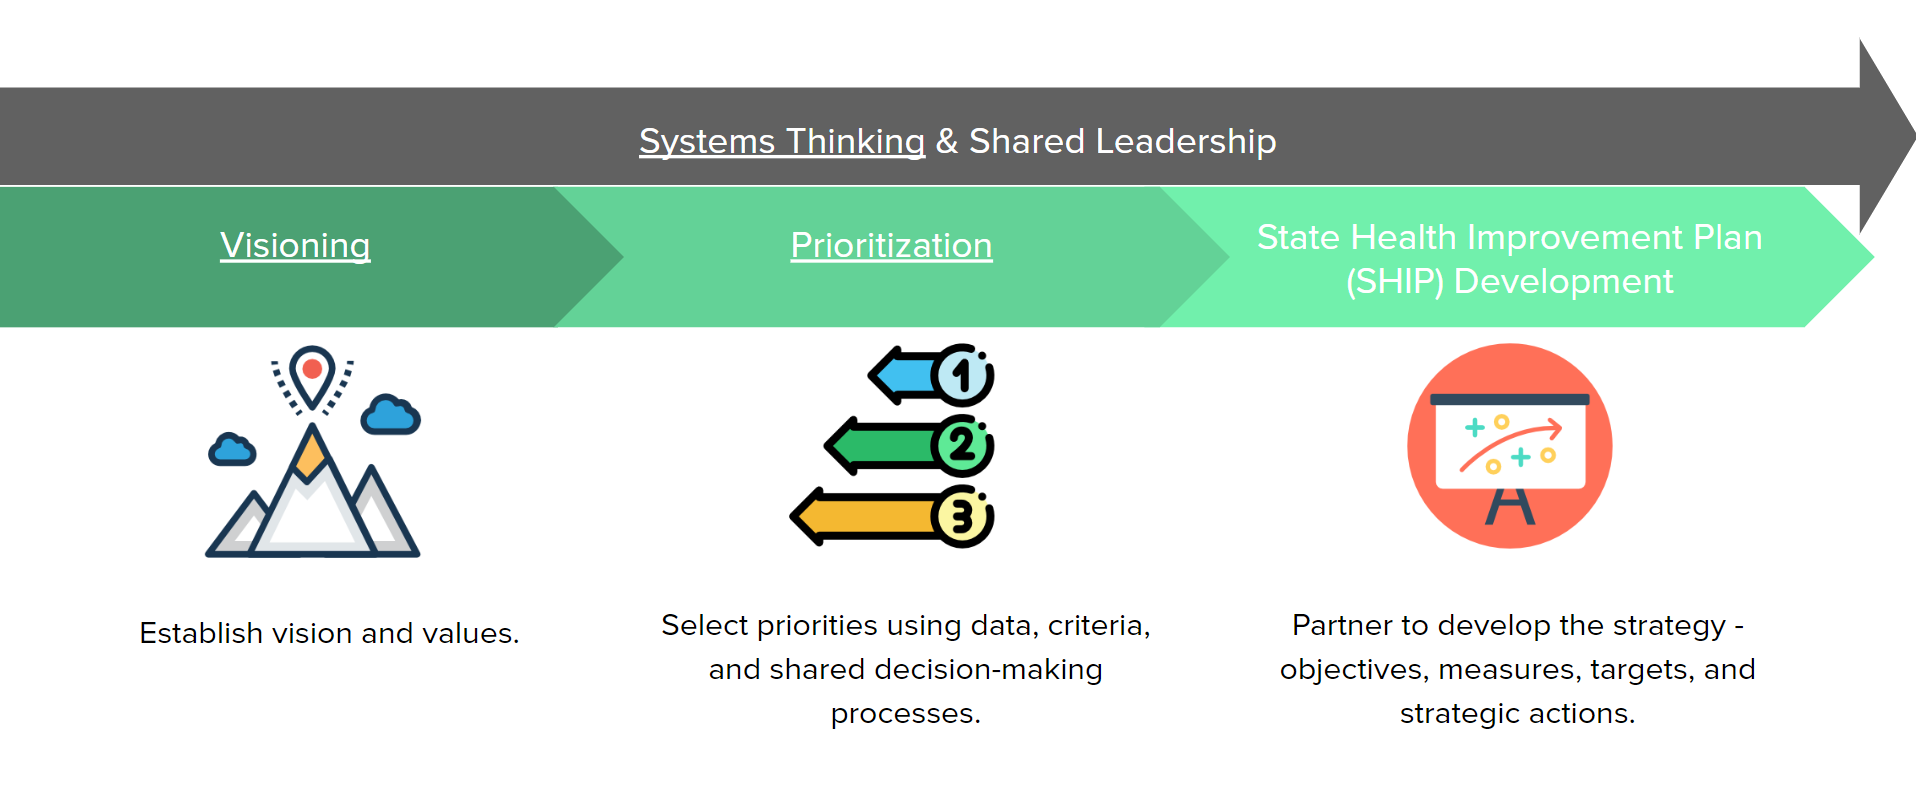 Image that illustrates the three phases of state health improvement planning. Those three phases are visioning, prioritization, and strategy development.